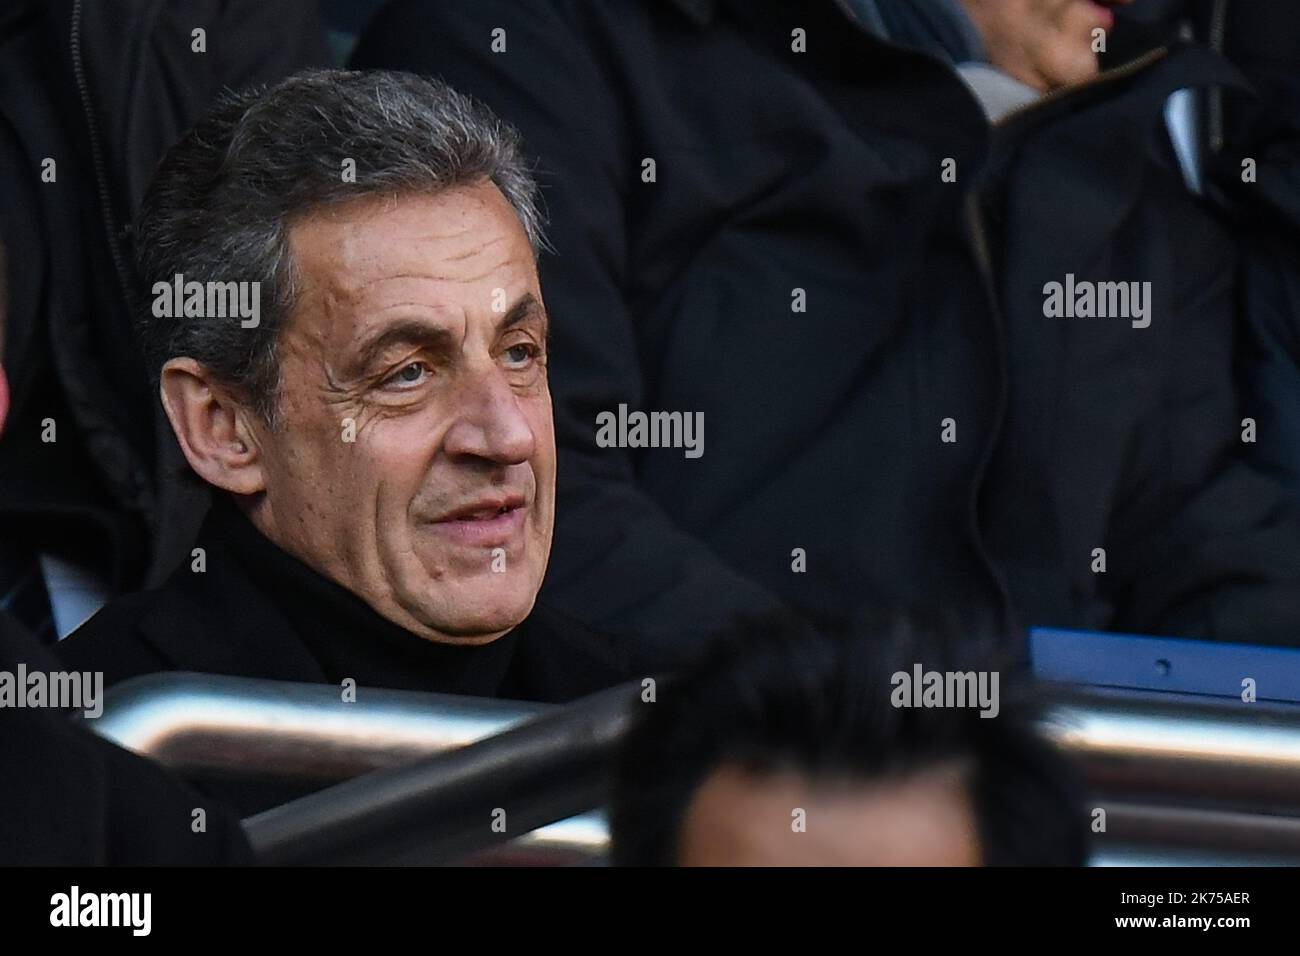 Former french president Nicolas Sarkozy attends  the French Ligue 1 soccer match between Paris Saint Germain (PSG) and Racing Club Strasbourg Alsace at the Parc des Princes stadium in Paris, France, 17 February 2018.  Stock Photo